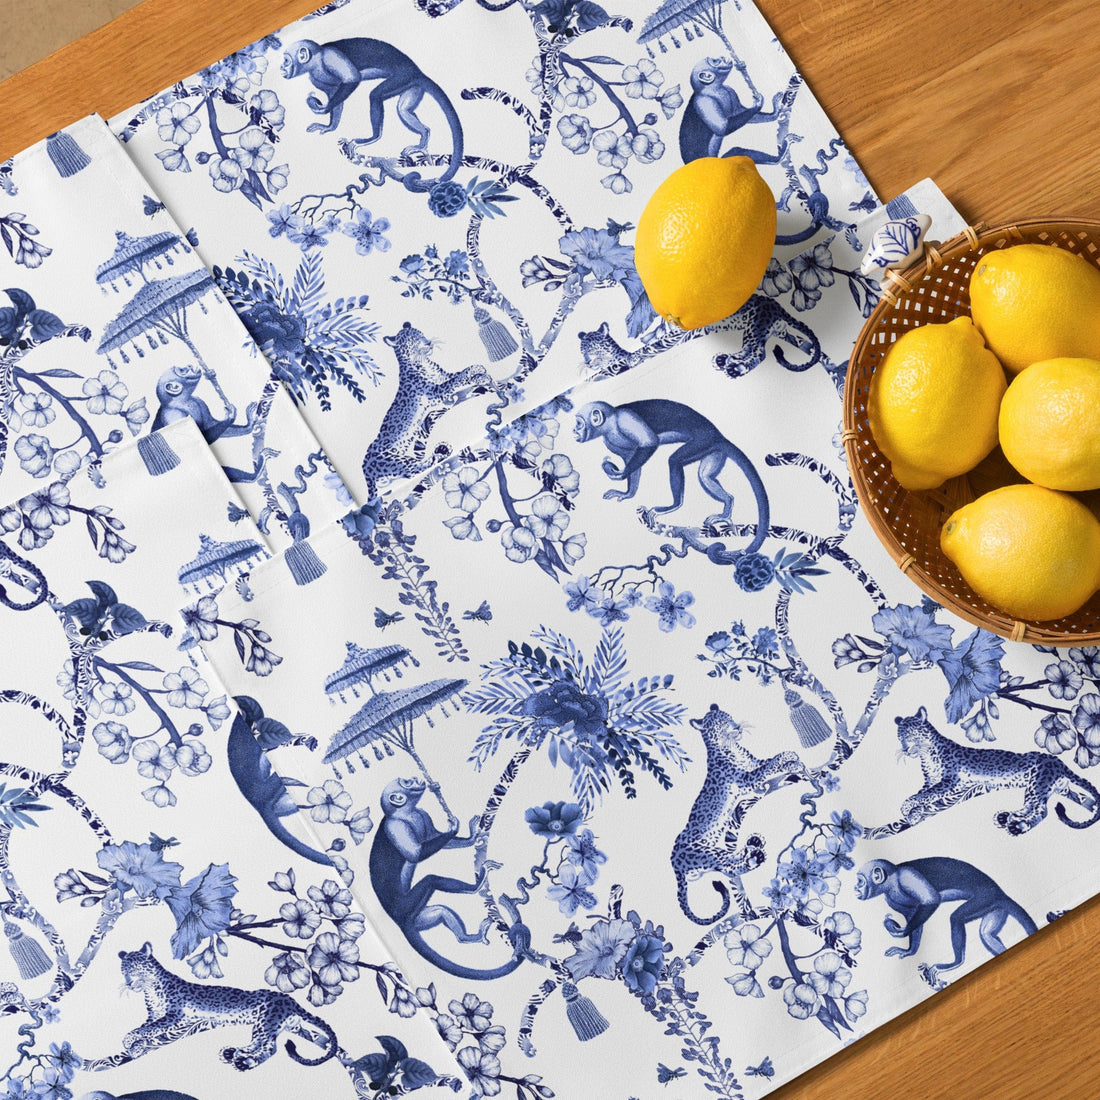 Kate McEnroe New York Chinoiserie Botanical Toile Placemats, Set of 4, Floral Blue and White Chinoiserie Jungle Table Linen, Farmhouse DecorPlacemats6256397_17484